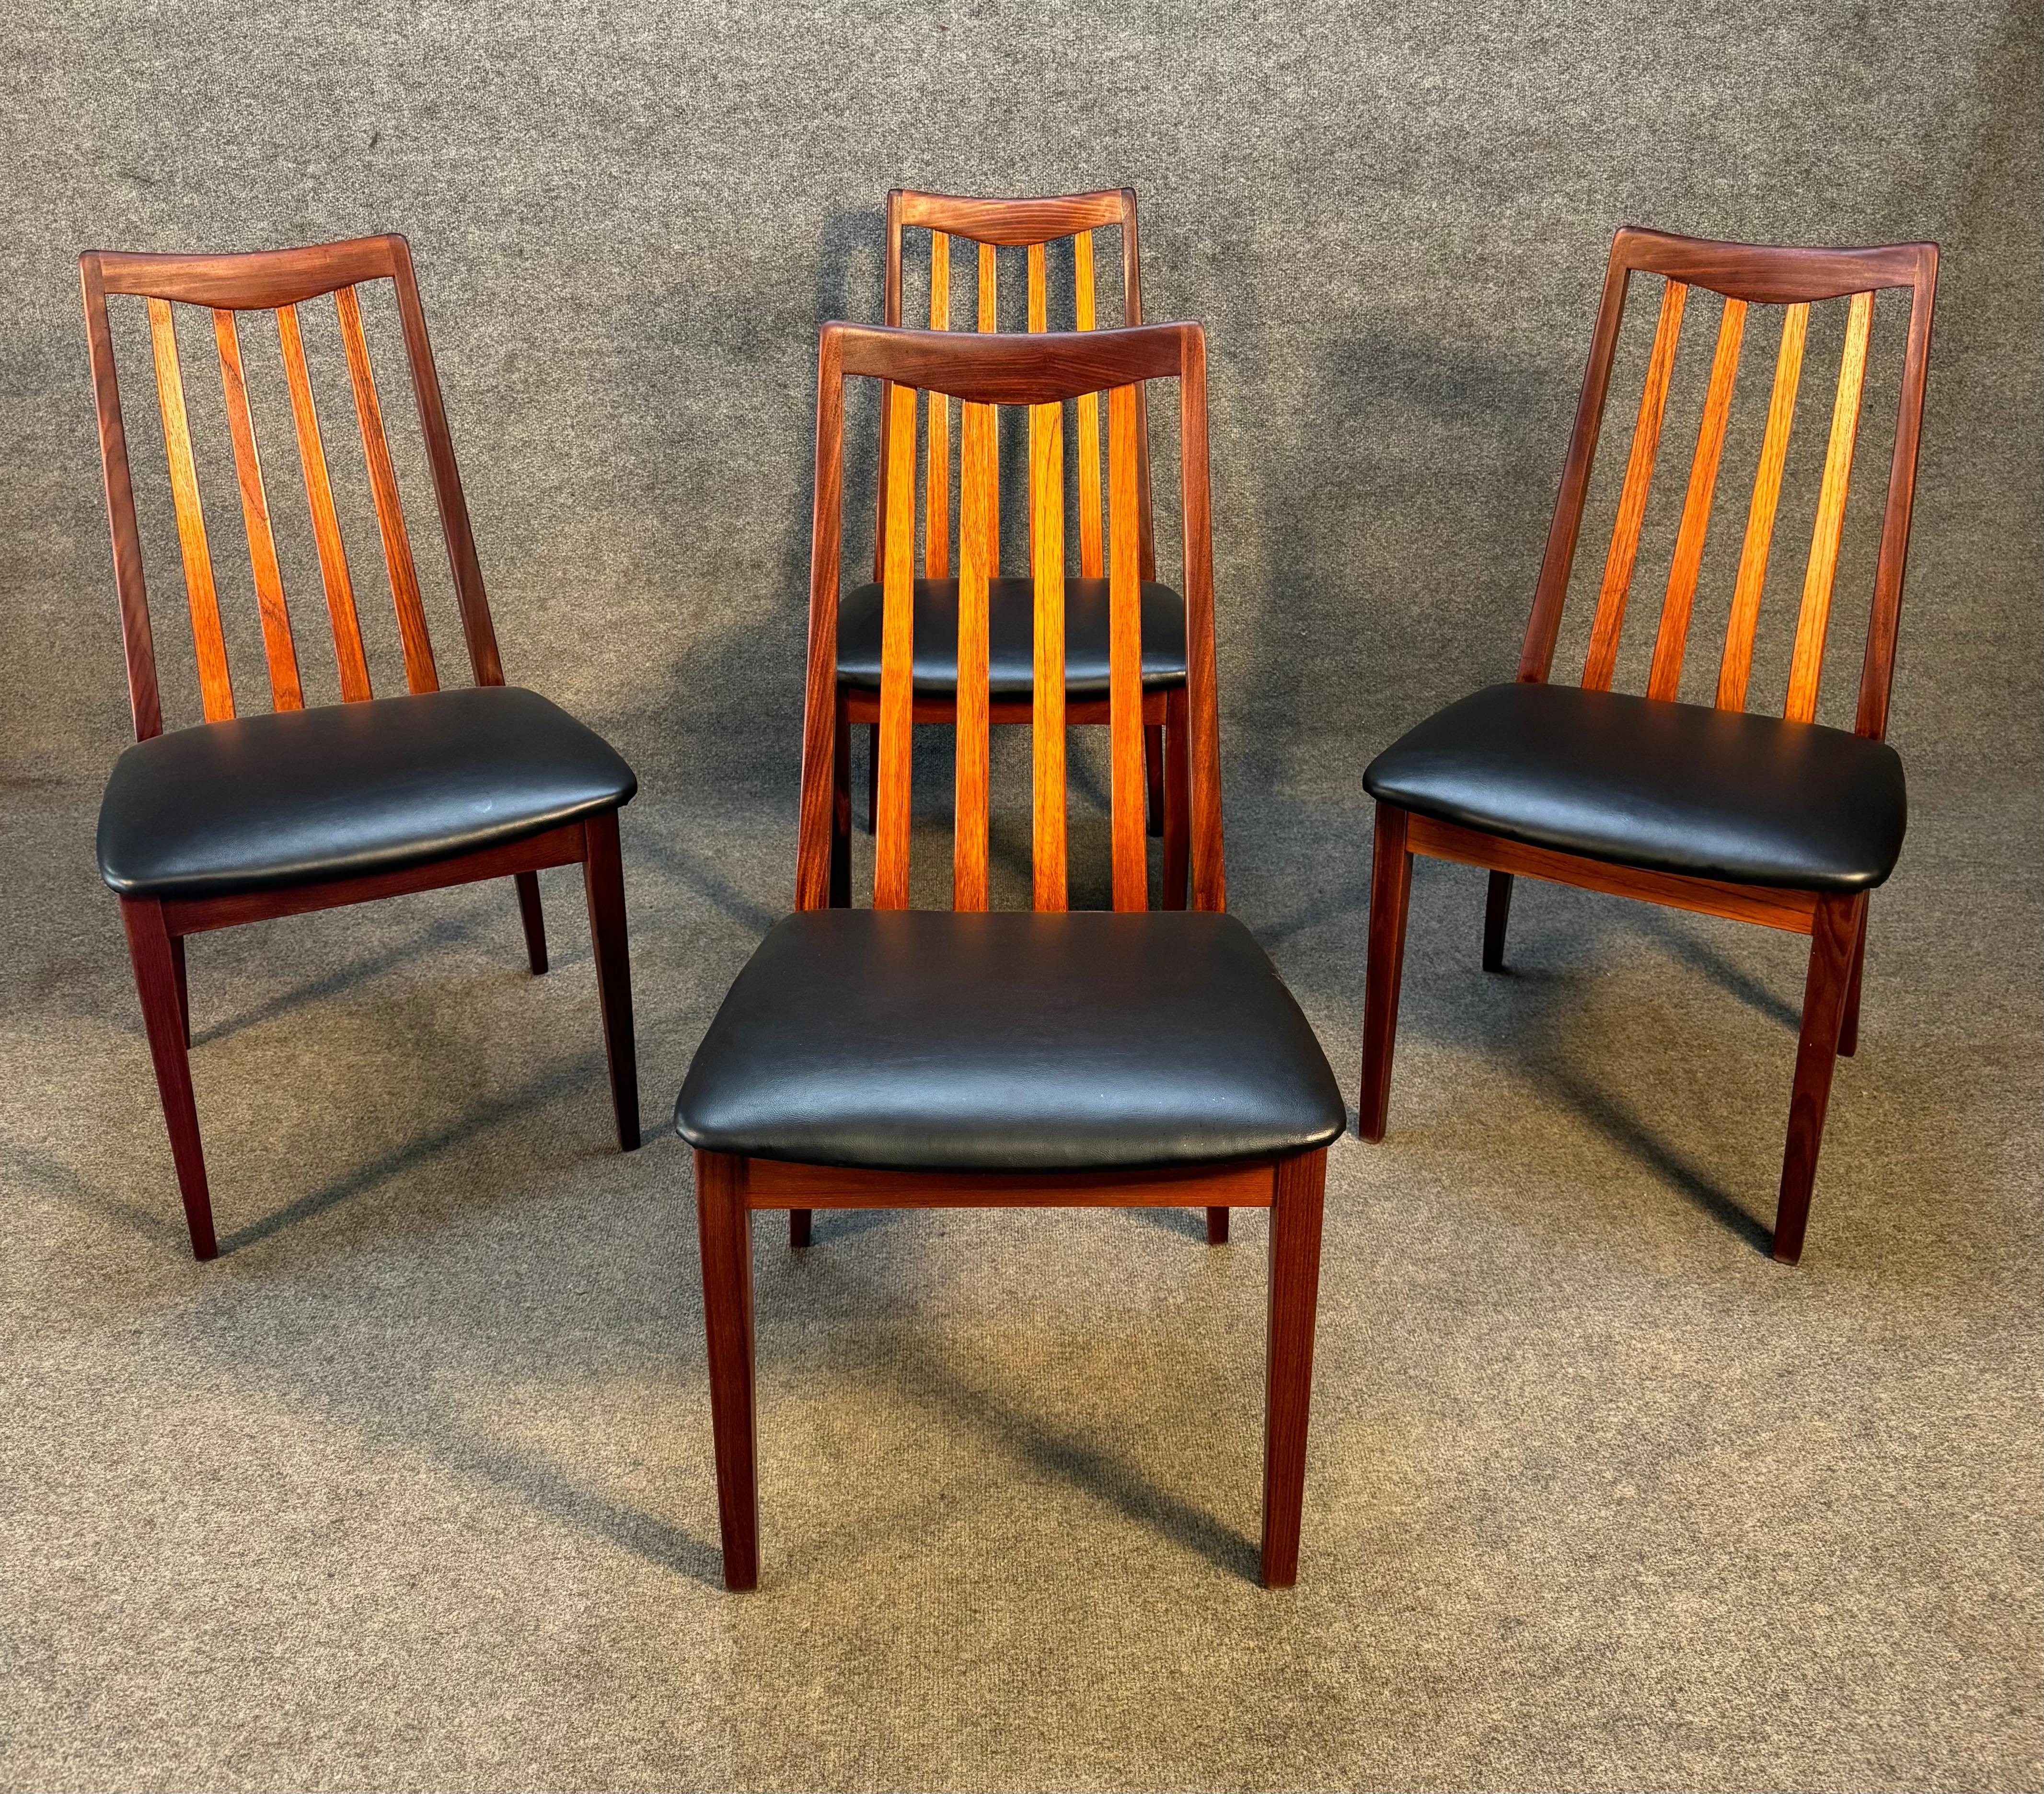 Here is a set of four beautiful British MCM teak dining chairs manufactured by G Plan in the 1960's. These comfortable high back chairs, recently imported from England to California before their refinishing, feature a vibrant wood grain, an